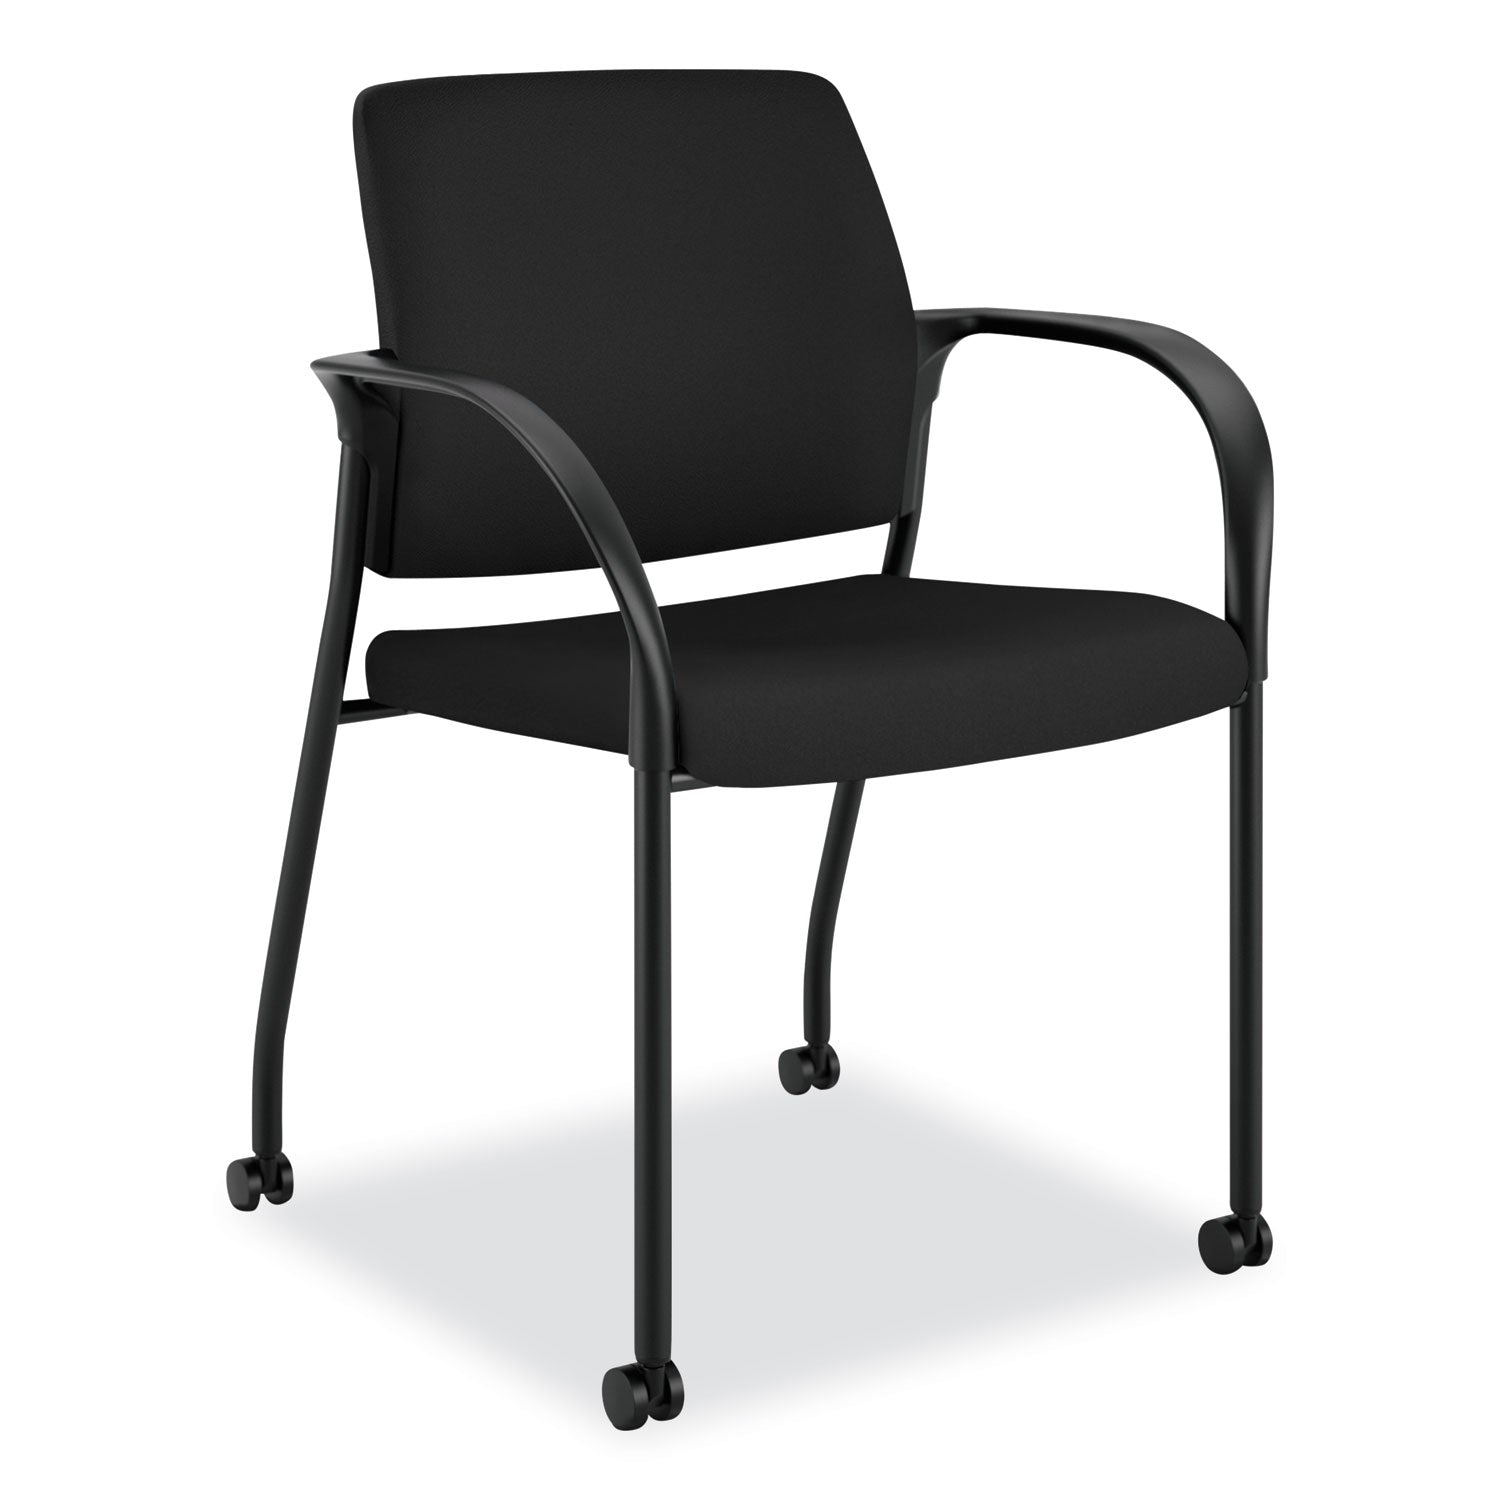 ignition-series-guest-chair-with-arms-polyester-fabric-seat-25-x-2175-x-335-black-ships-in-7-10-business-days_honis109hcu10 - 1